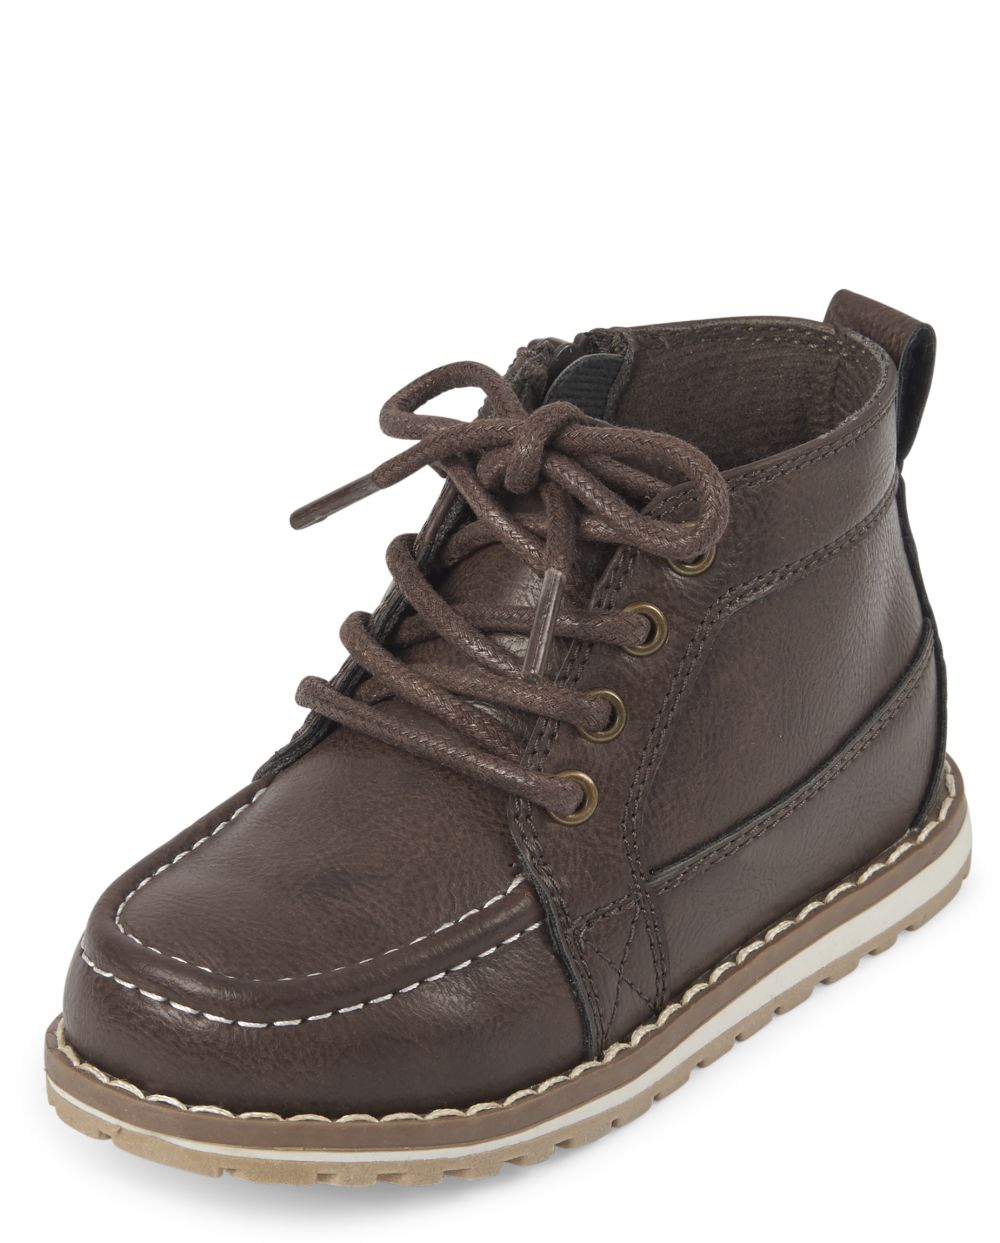 

s Toddler Boys Lace Up Mid Top Boots - Brown - The Children's Place